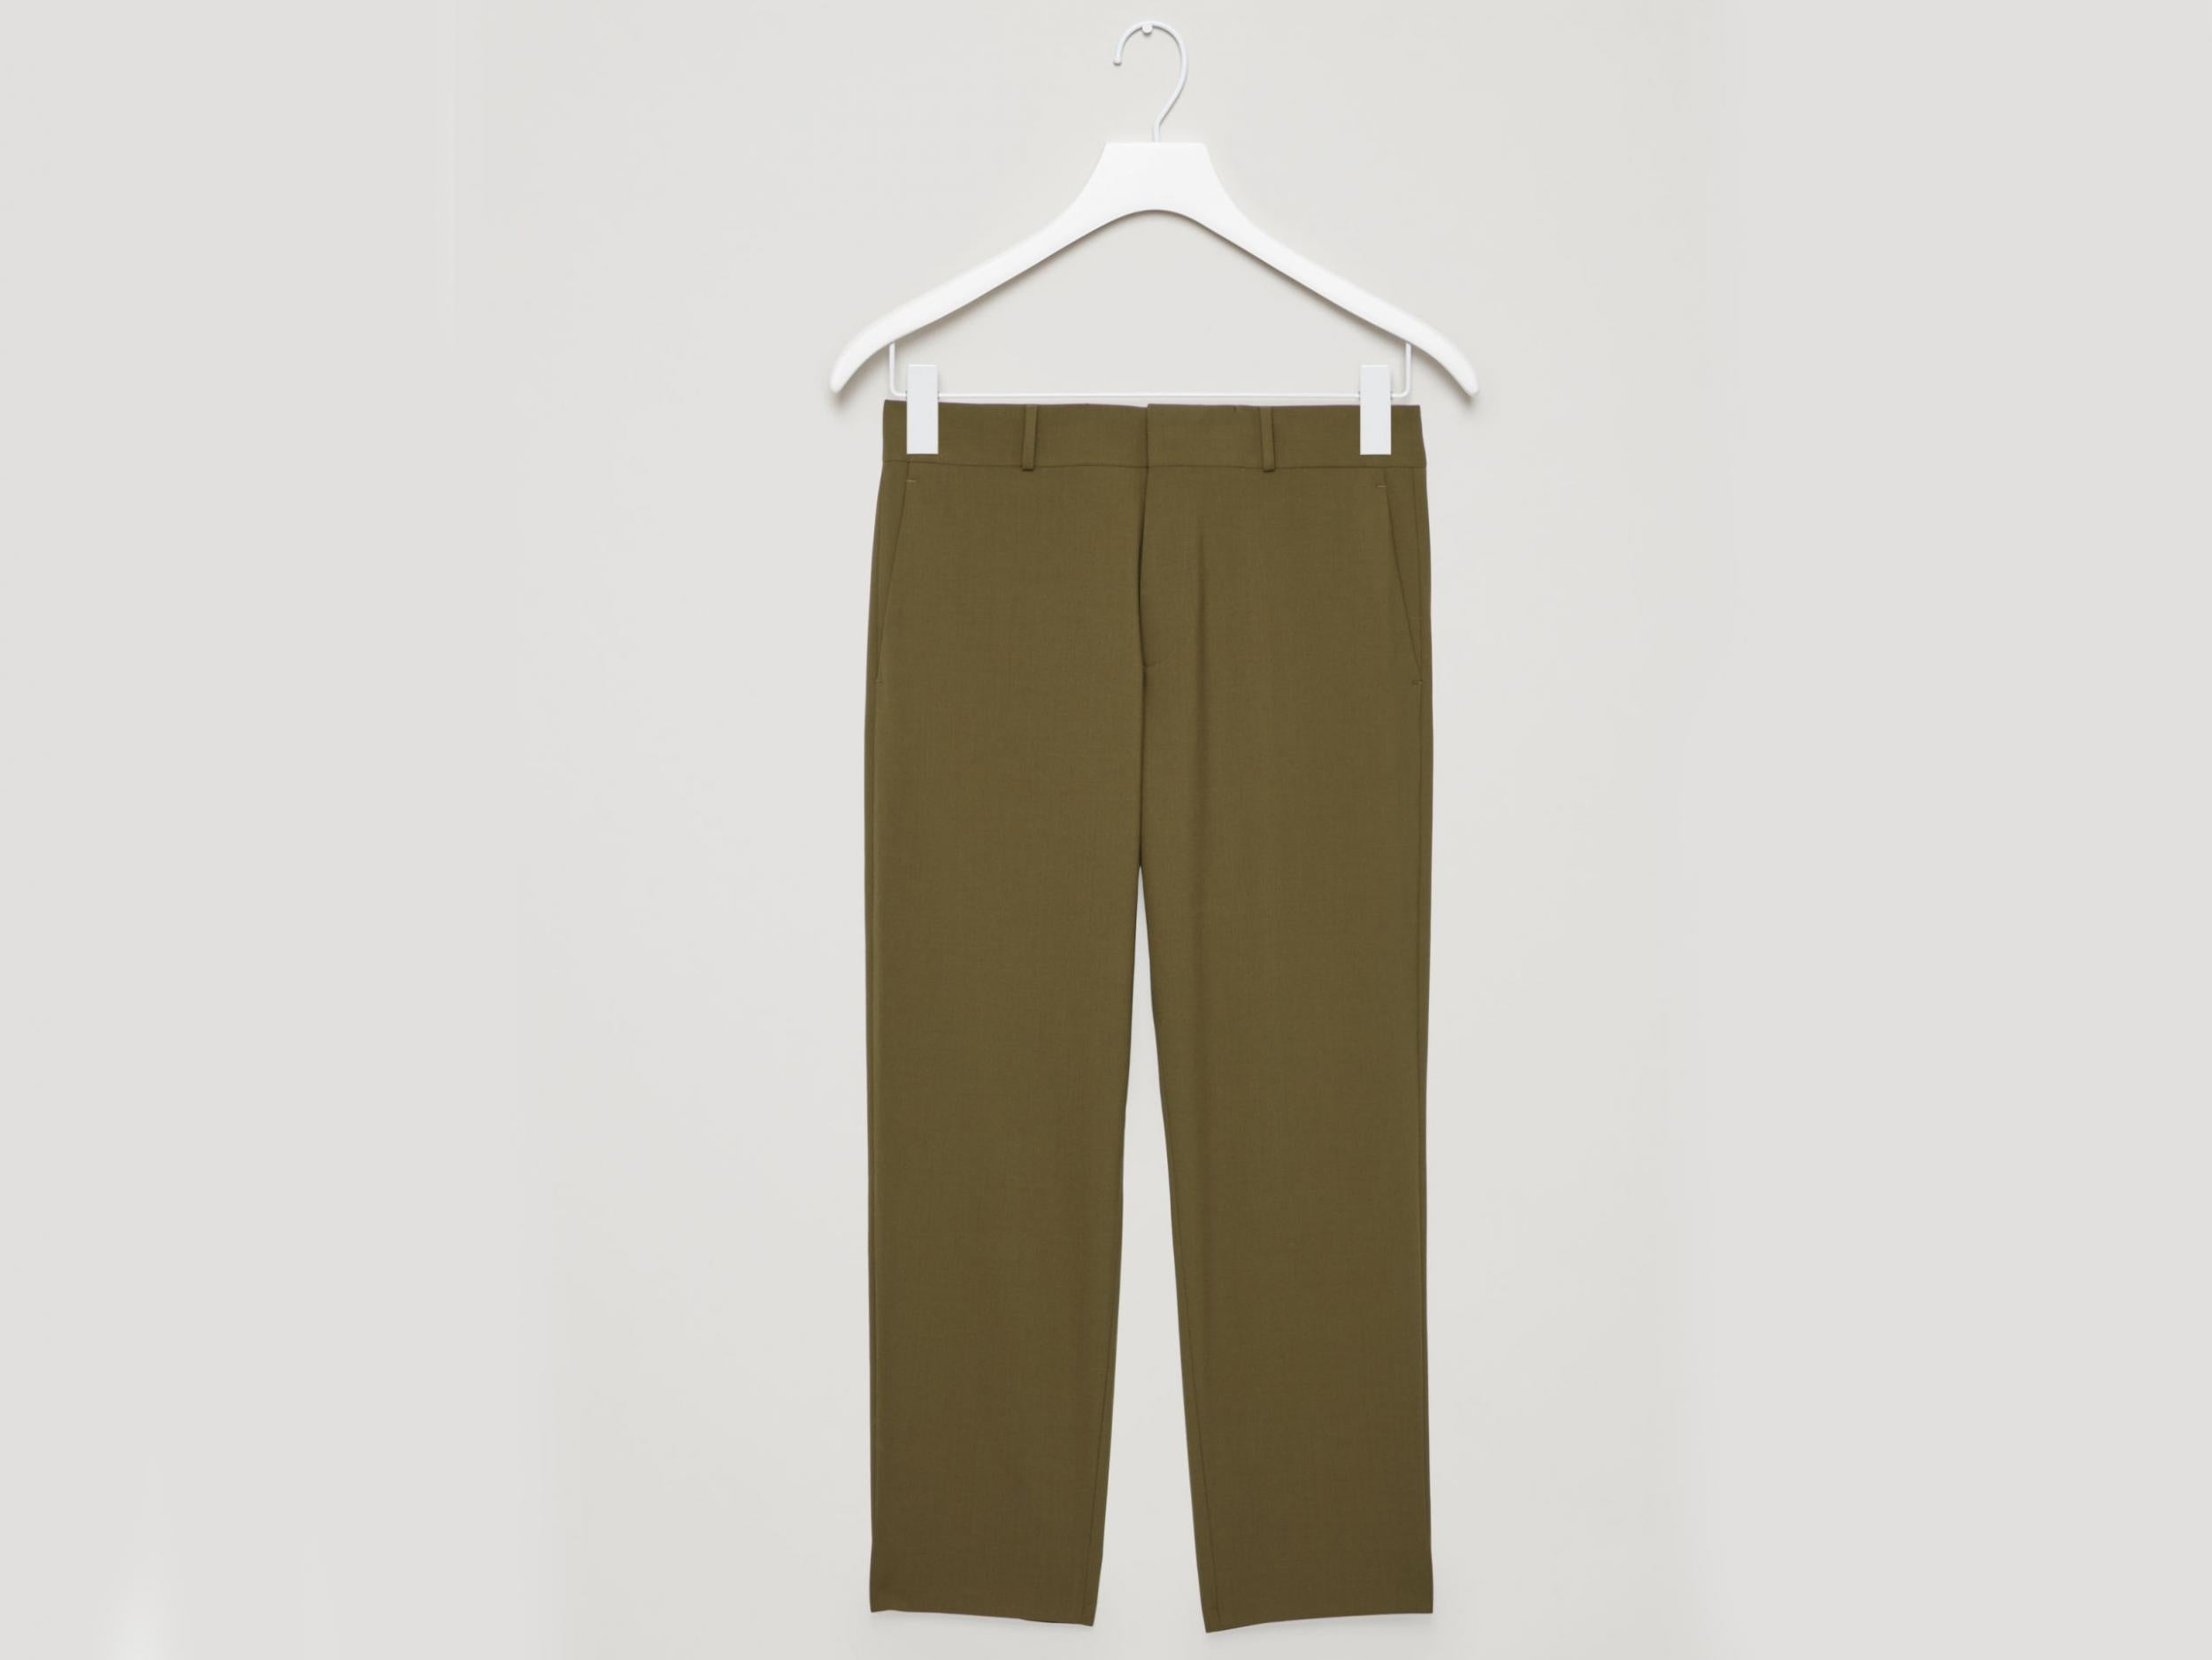 Cropped Wool Trousers, £79, Cos Stores